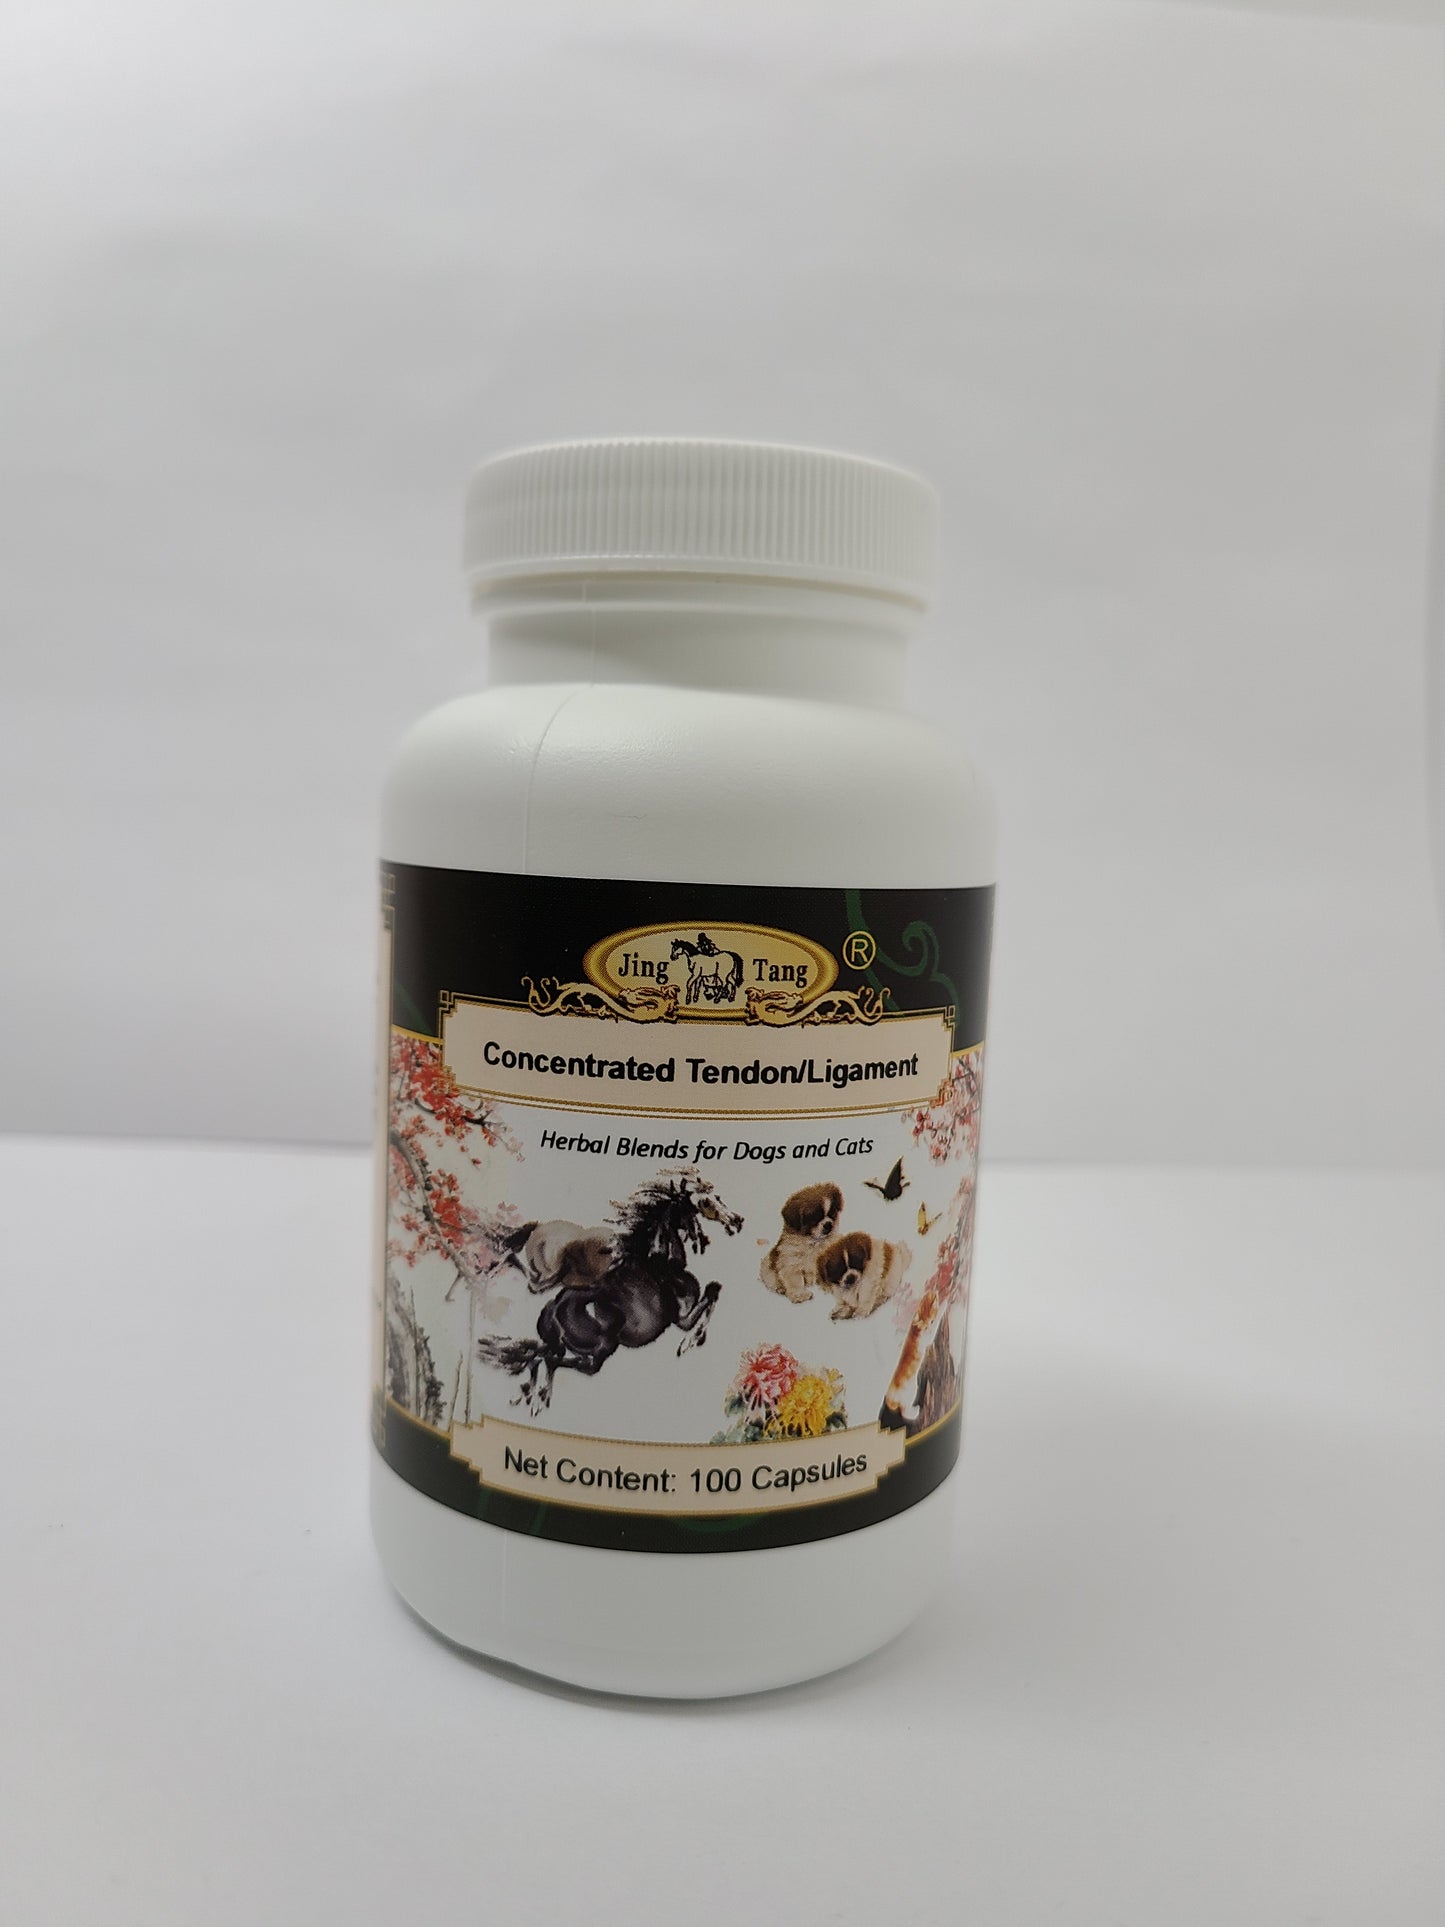 Jing Tang Herbals: Concentrated Tendon Ligament 0.5g capsule (100 capsule bottle)